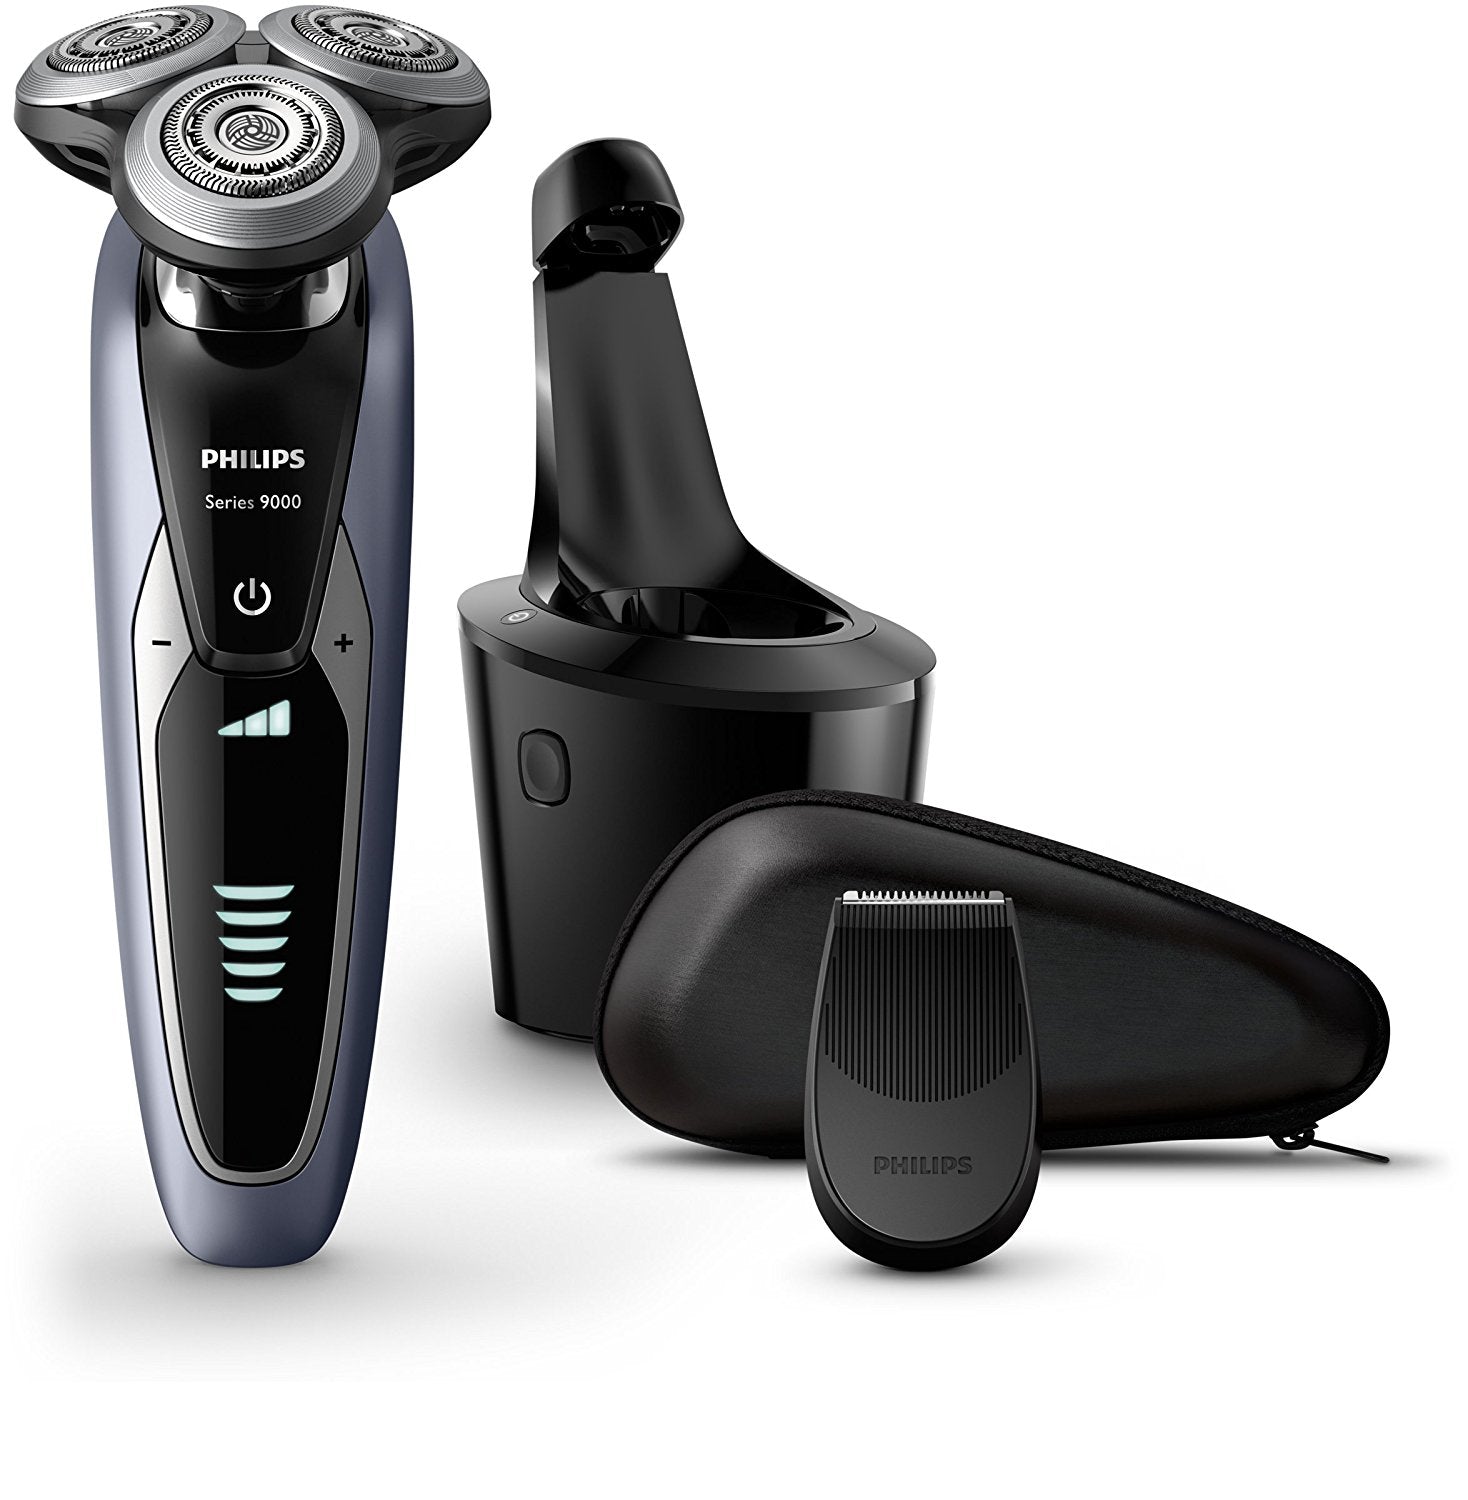 Philips Norelco Shaver S9721/27 Series 9000 with Smartclean, Refurbished - 50min shaving time, 1 hour charge, dual voltage, waterproof TRAVELD - cleaning solution NOT included